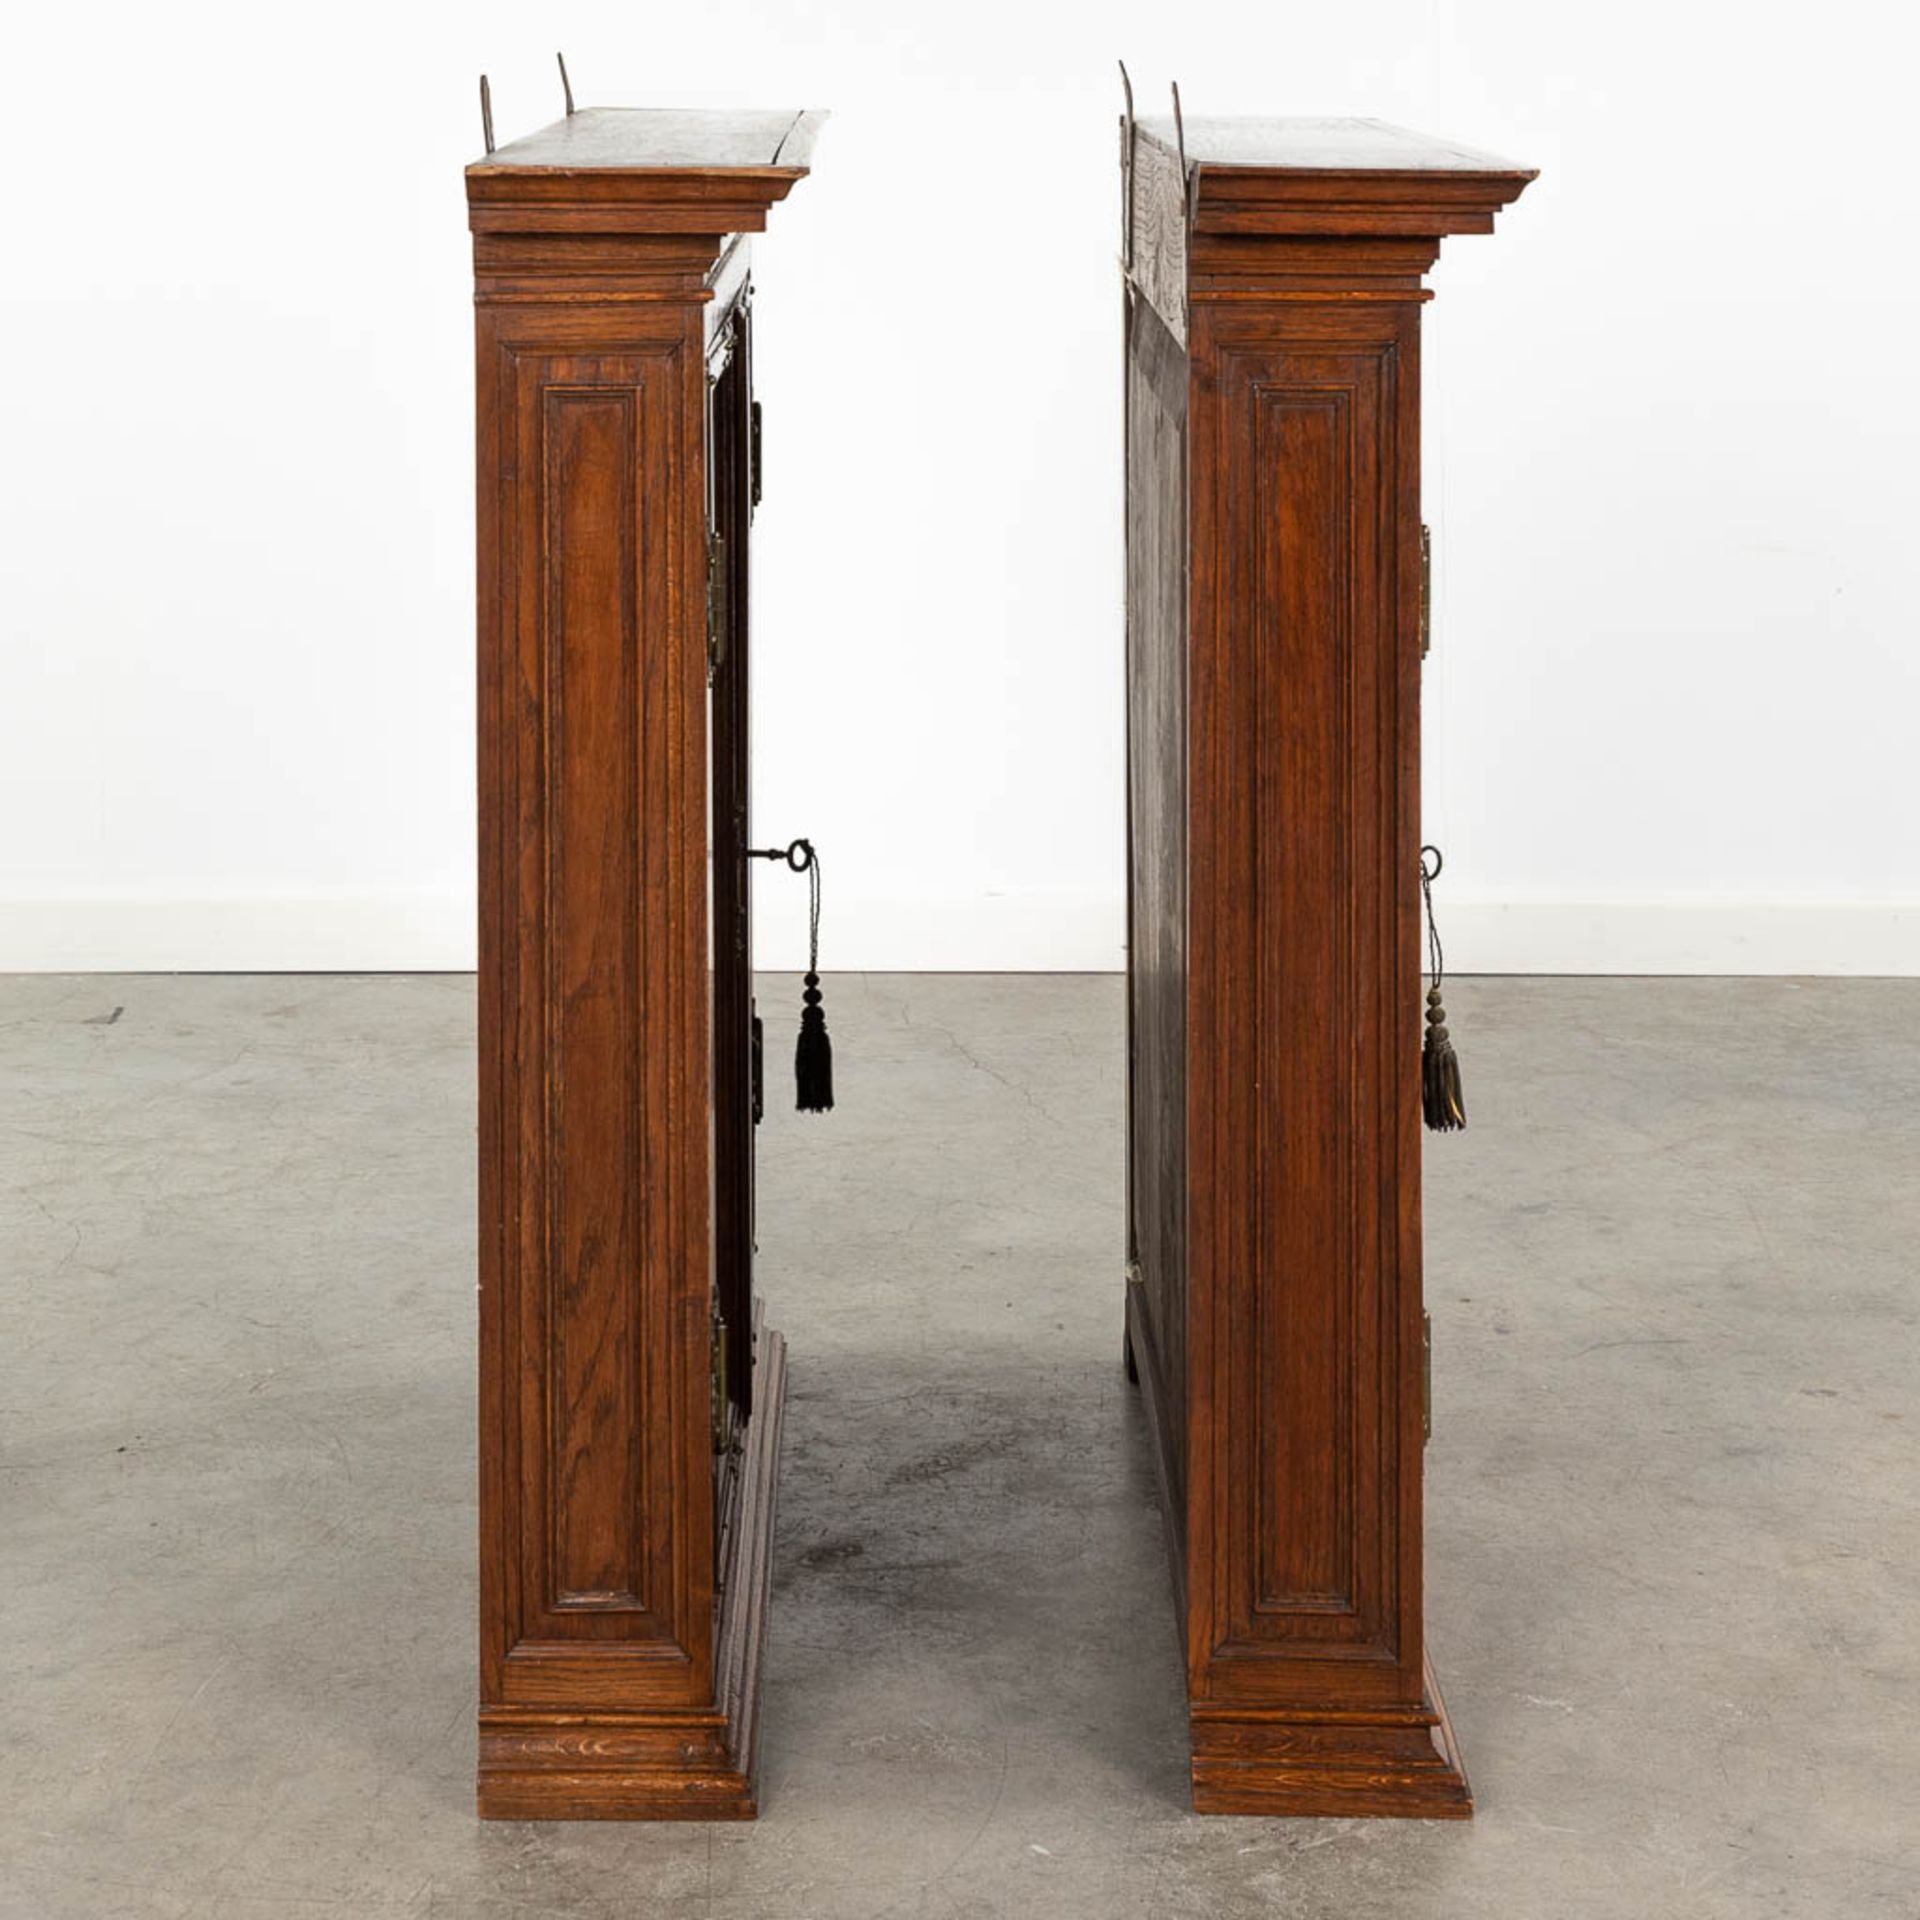 A pair of hanging cabinets, wood and glass. Circa 1900. (L: 17 x W: 75 x H: 83 cm) - Image 4 of 9